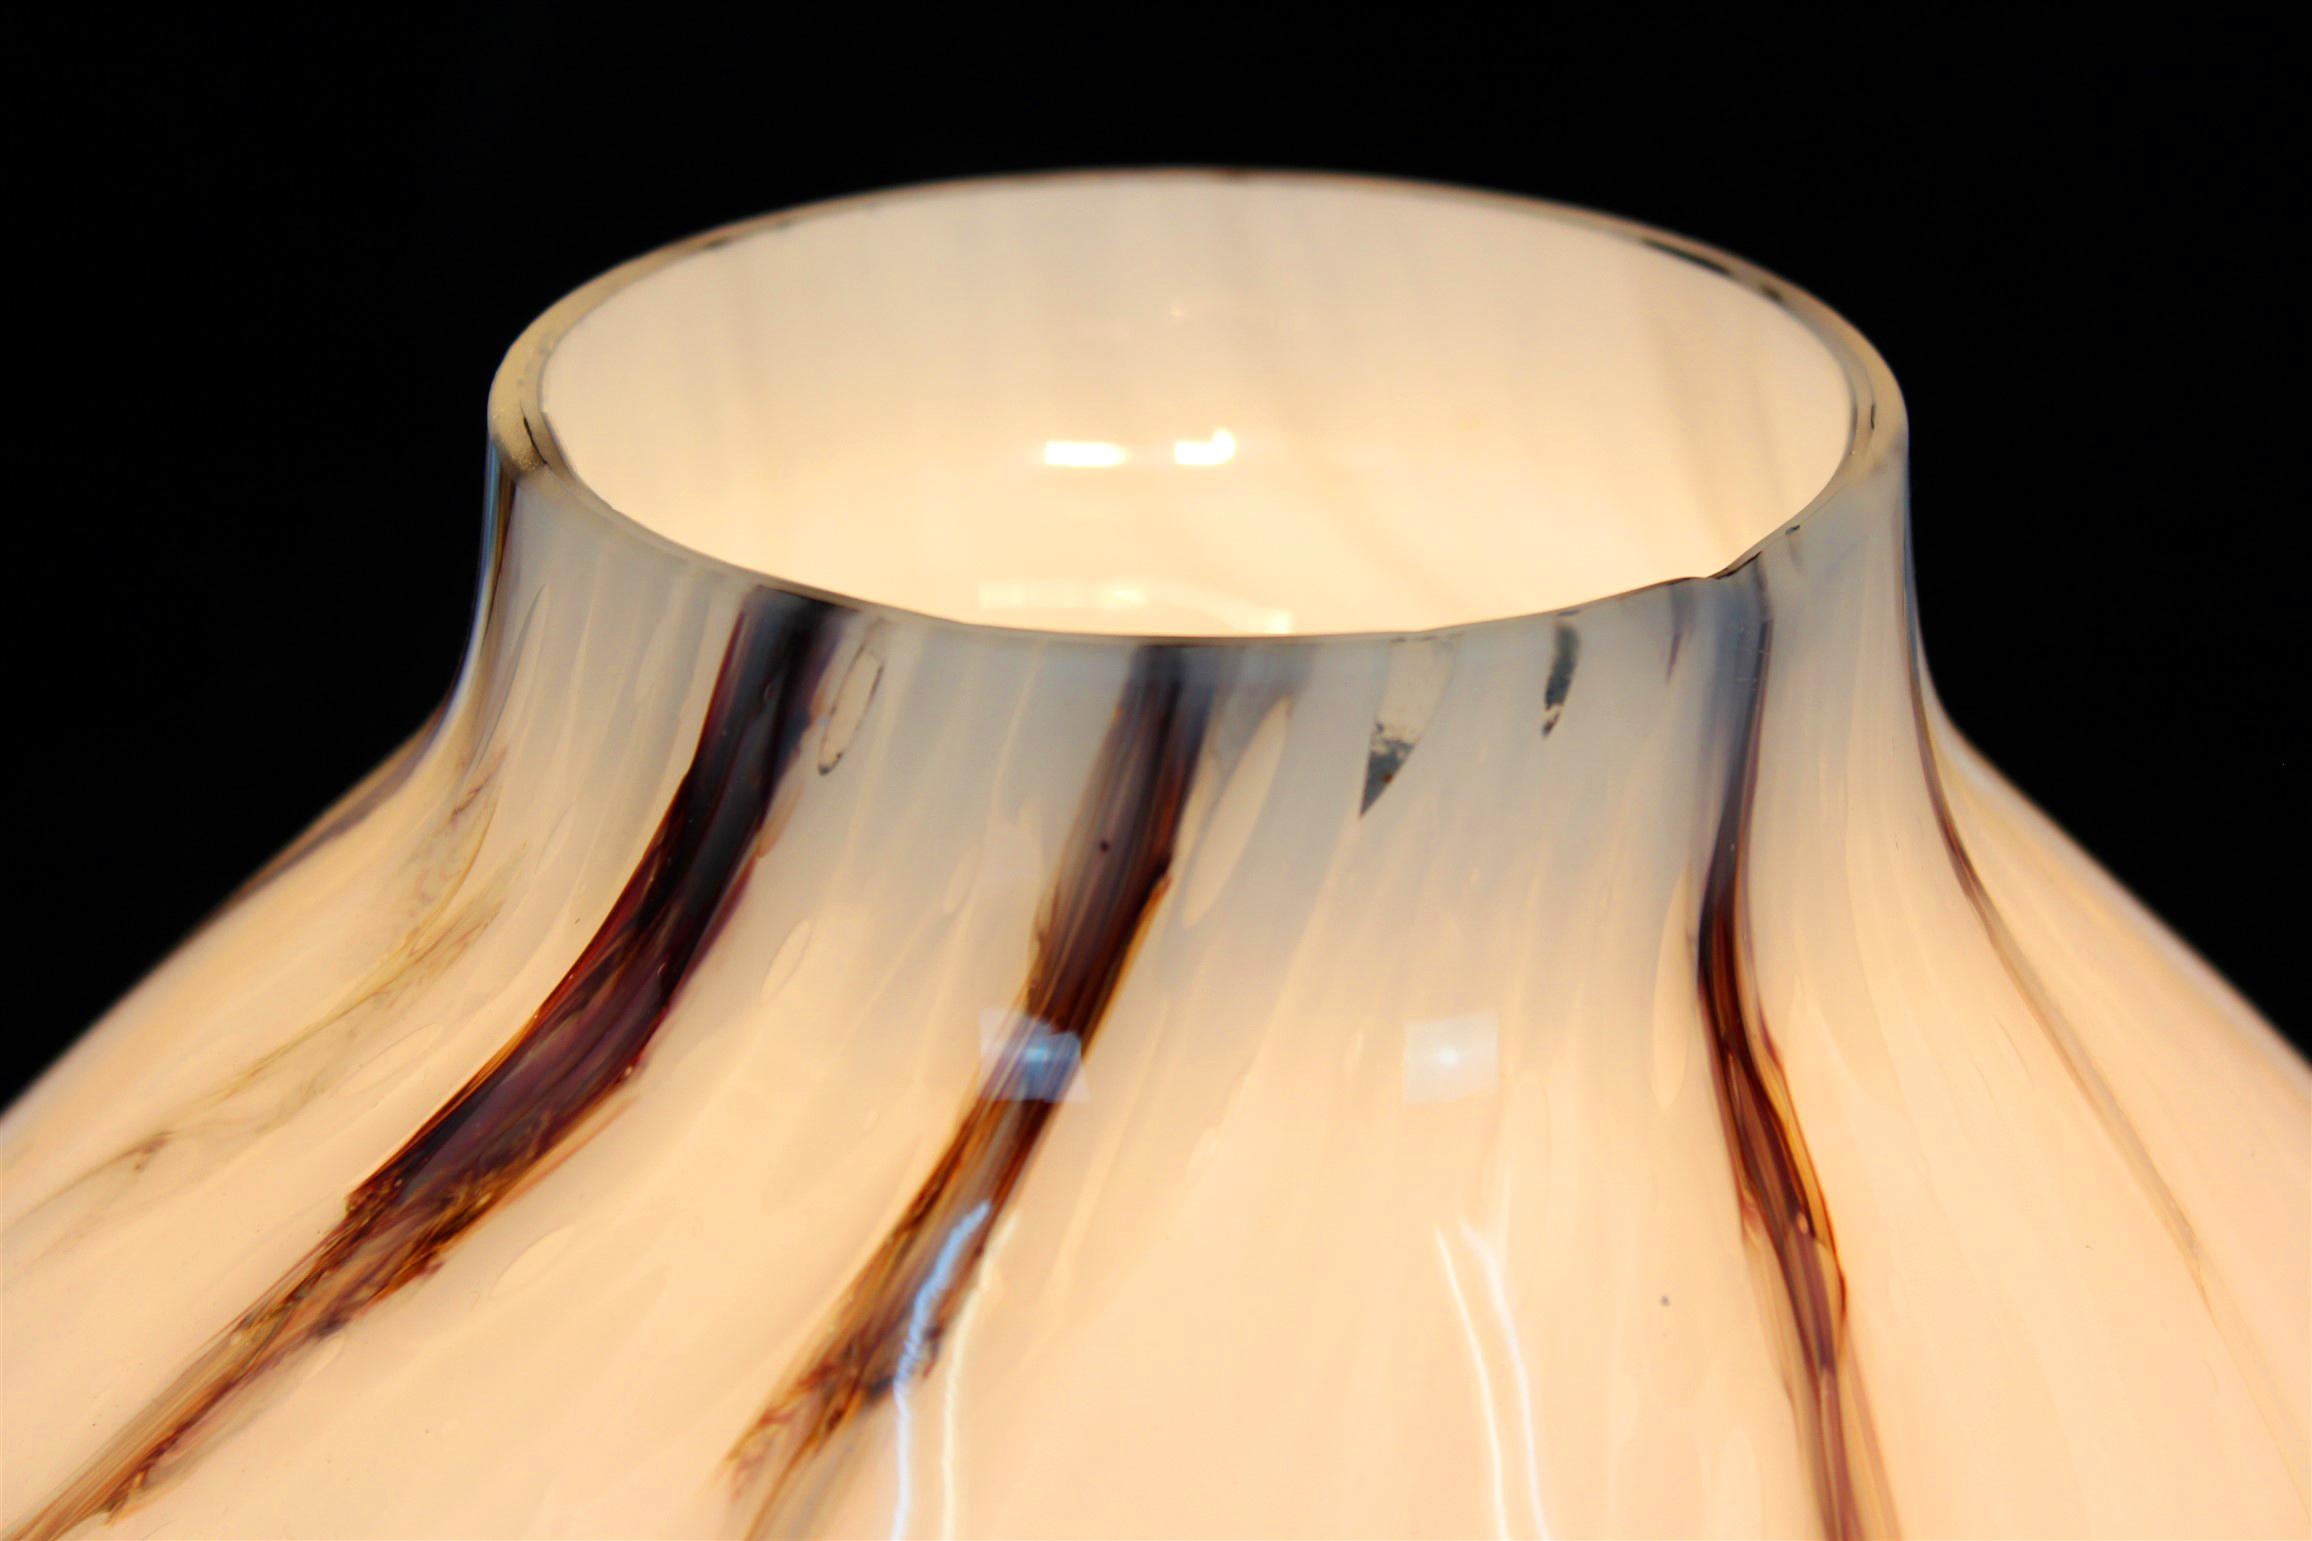 Midcentury Glass Table Lamp by Stepan Tabera for Opp Jihlava, 1970s For Sale 7